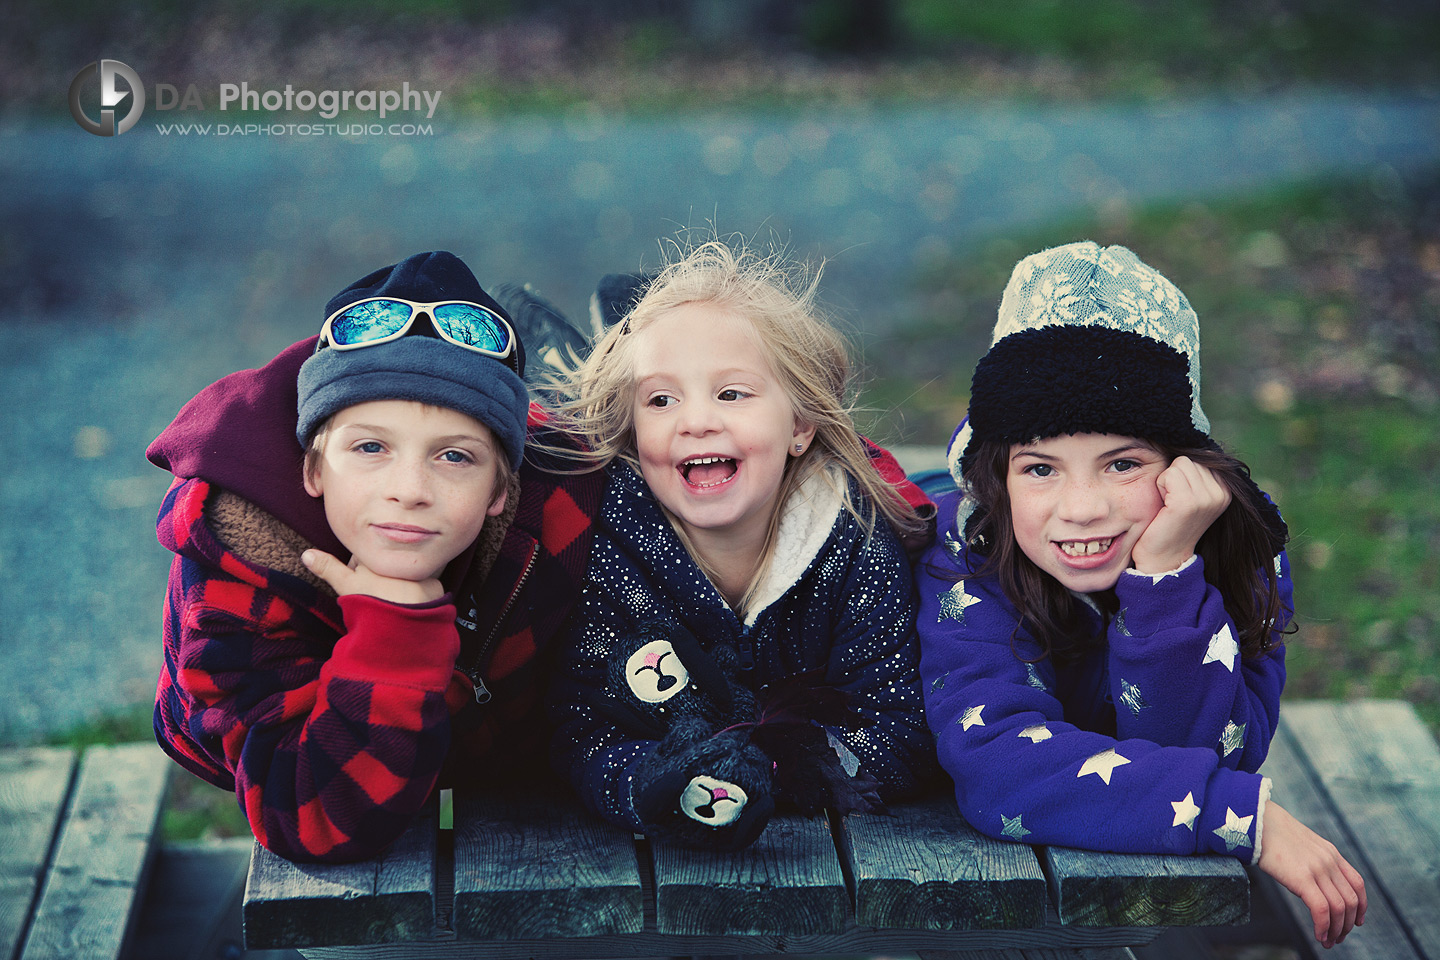 Three Different Personalities in One Great Picture - Family Photography by DA Photography